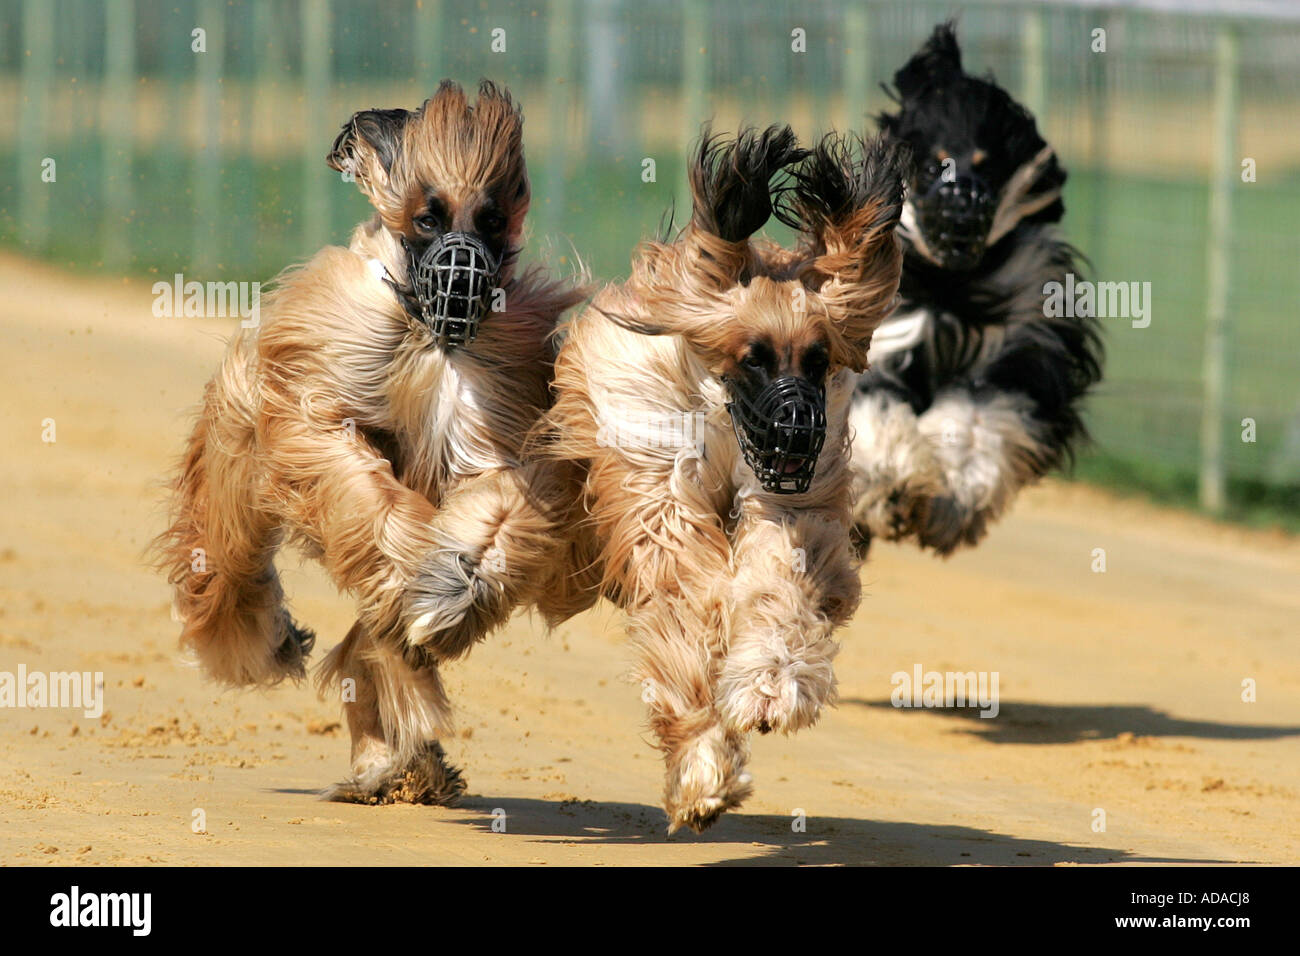 Afghanistan Hound, Afghan Hound (Canis lupus f. familiaris), three individuals at race, Germany Stock Photo